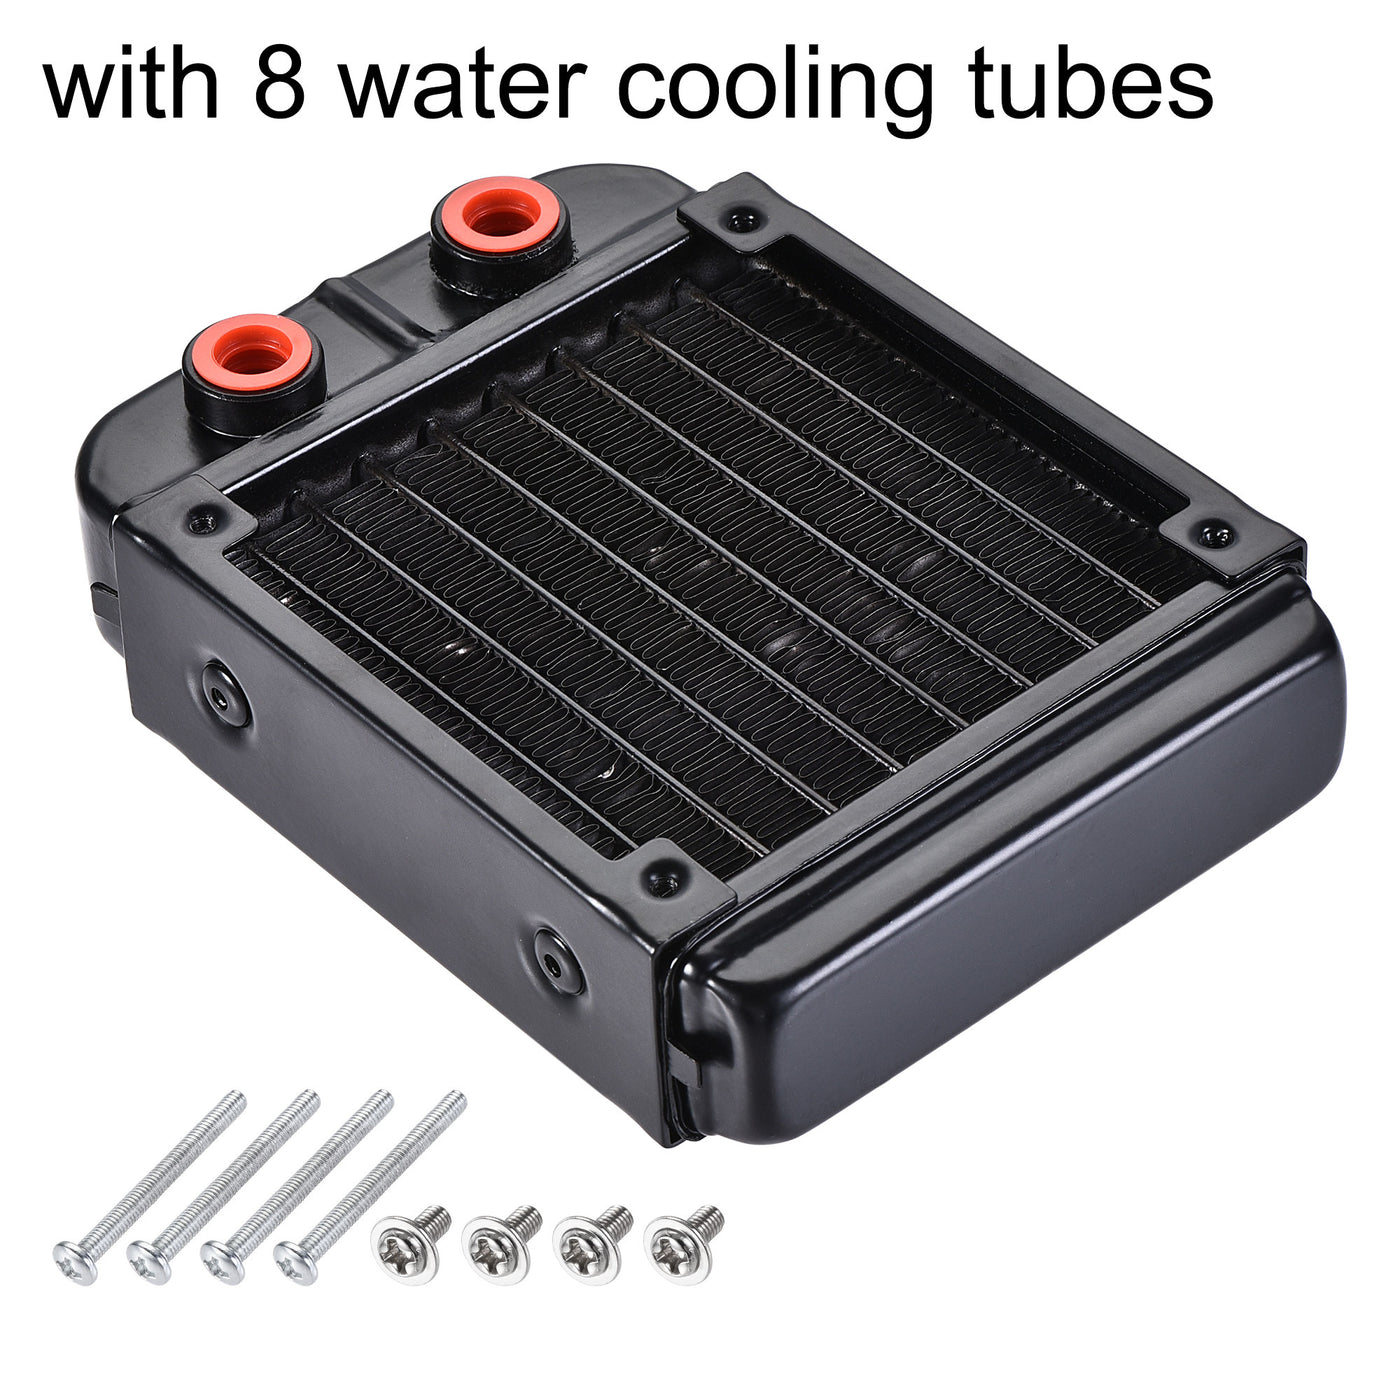 uxcell Uxcell Water Cooling Radiator for PC CPU 133mm Long G1/4 Thread with 8 Aluminum Tube